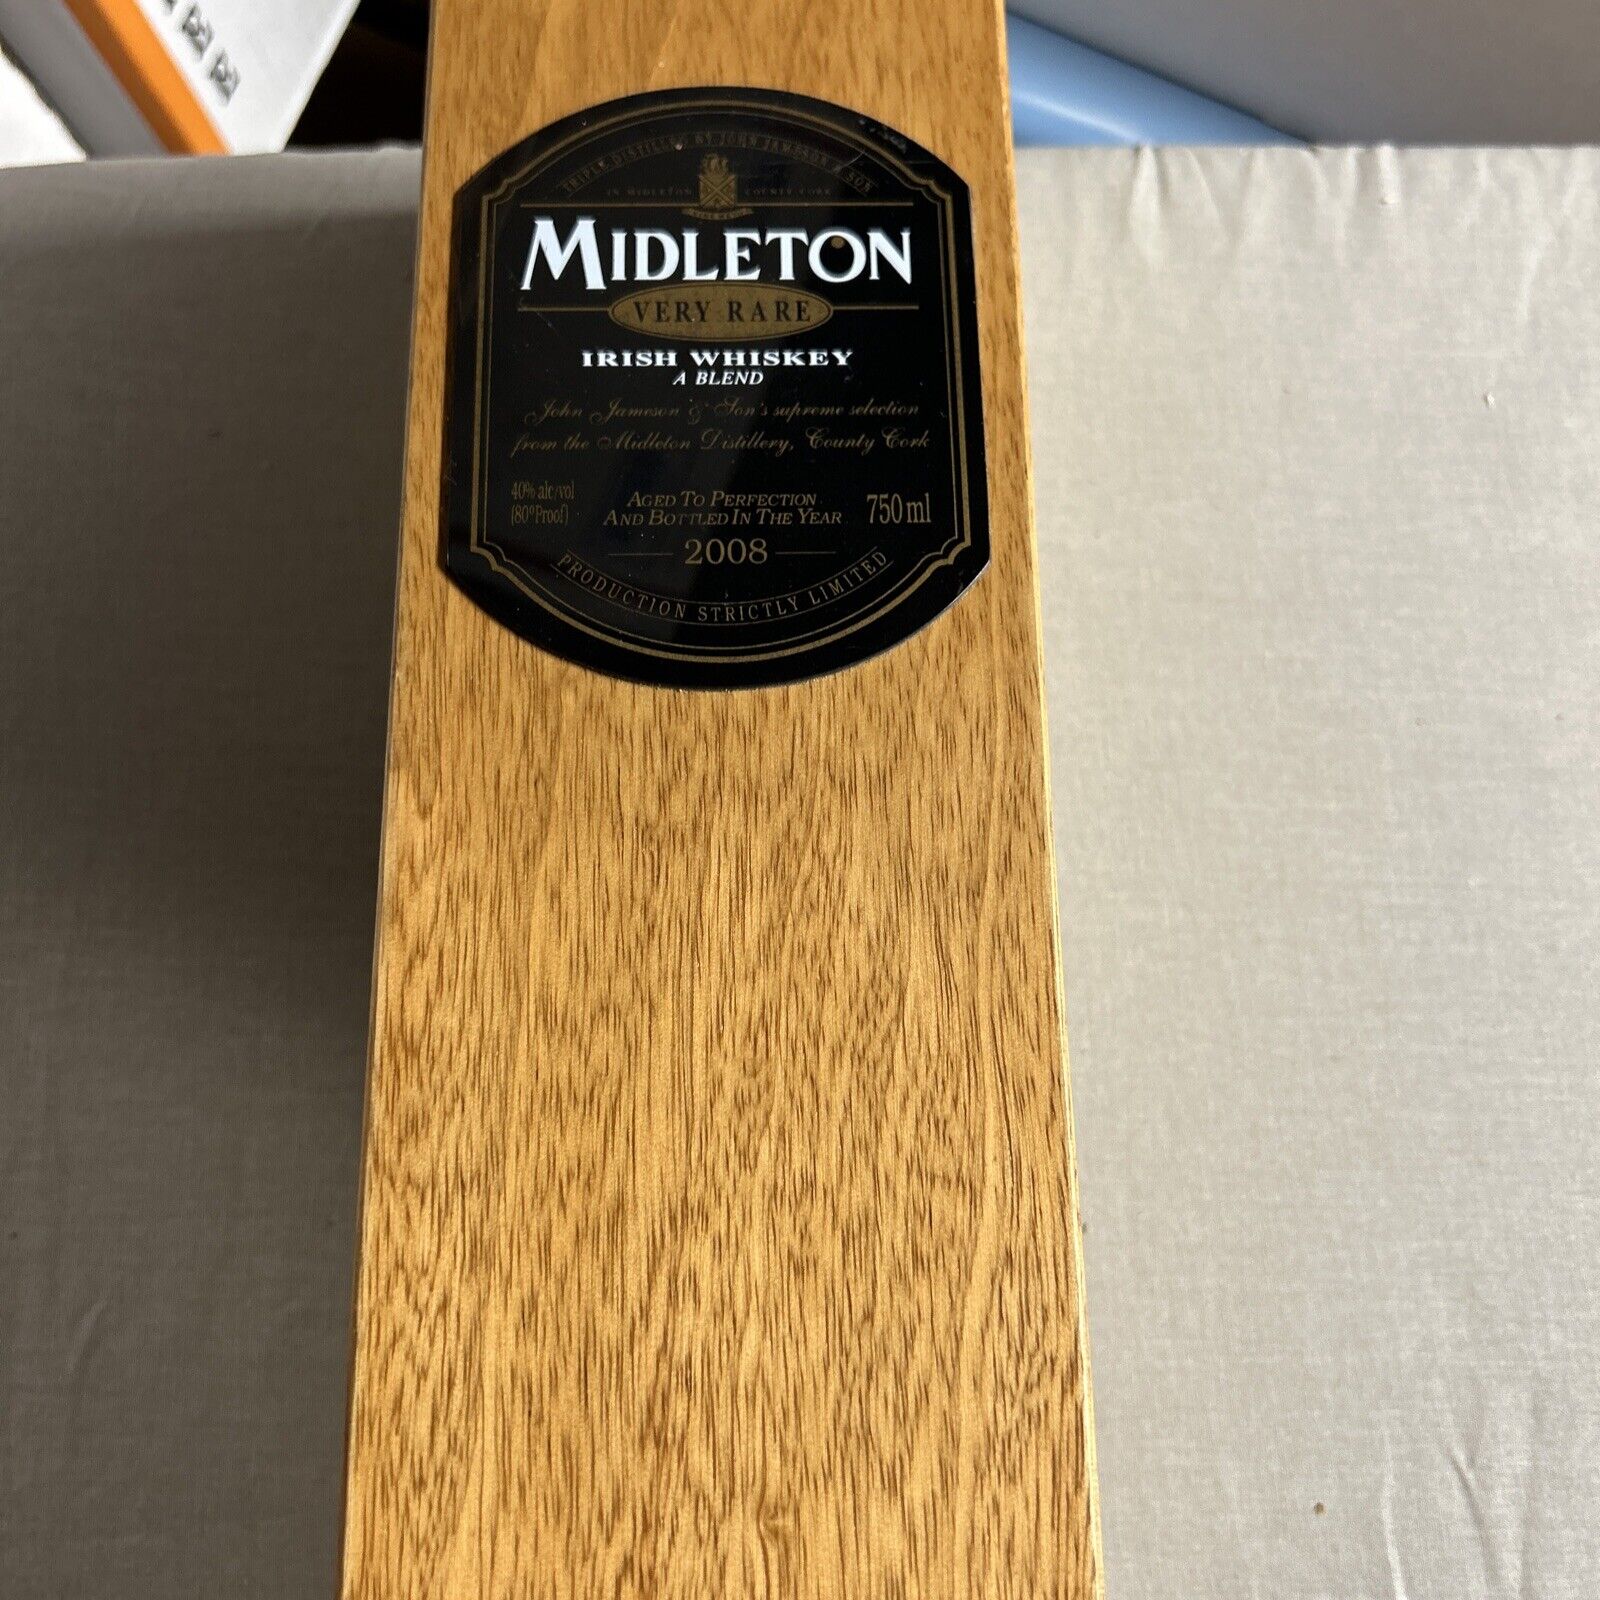 BOX ONLY for JAMESON MIDLETON VERY RARE IRISH WHISKEY Wooden Box from 2008